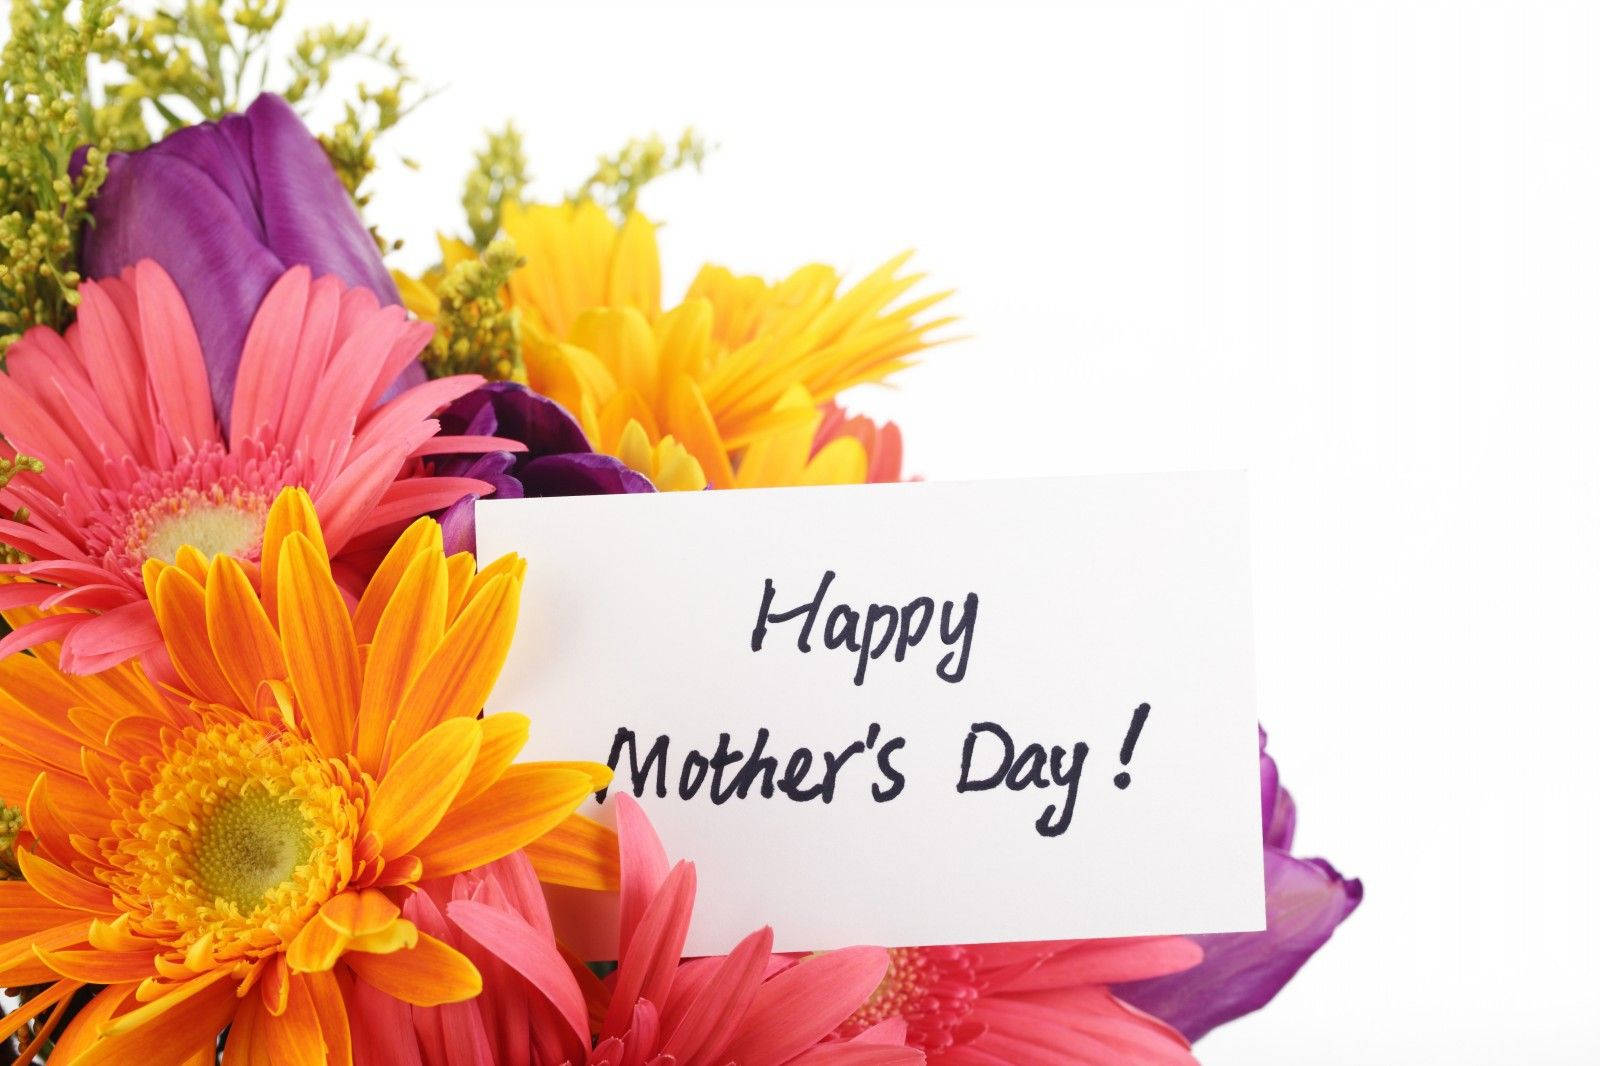 Colorful Flowers Happy Mother's Day Wallpaper